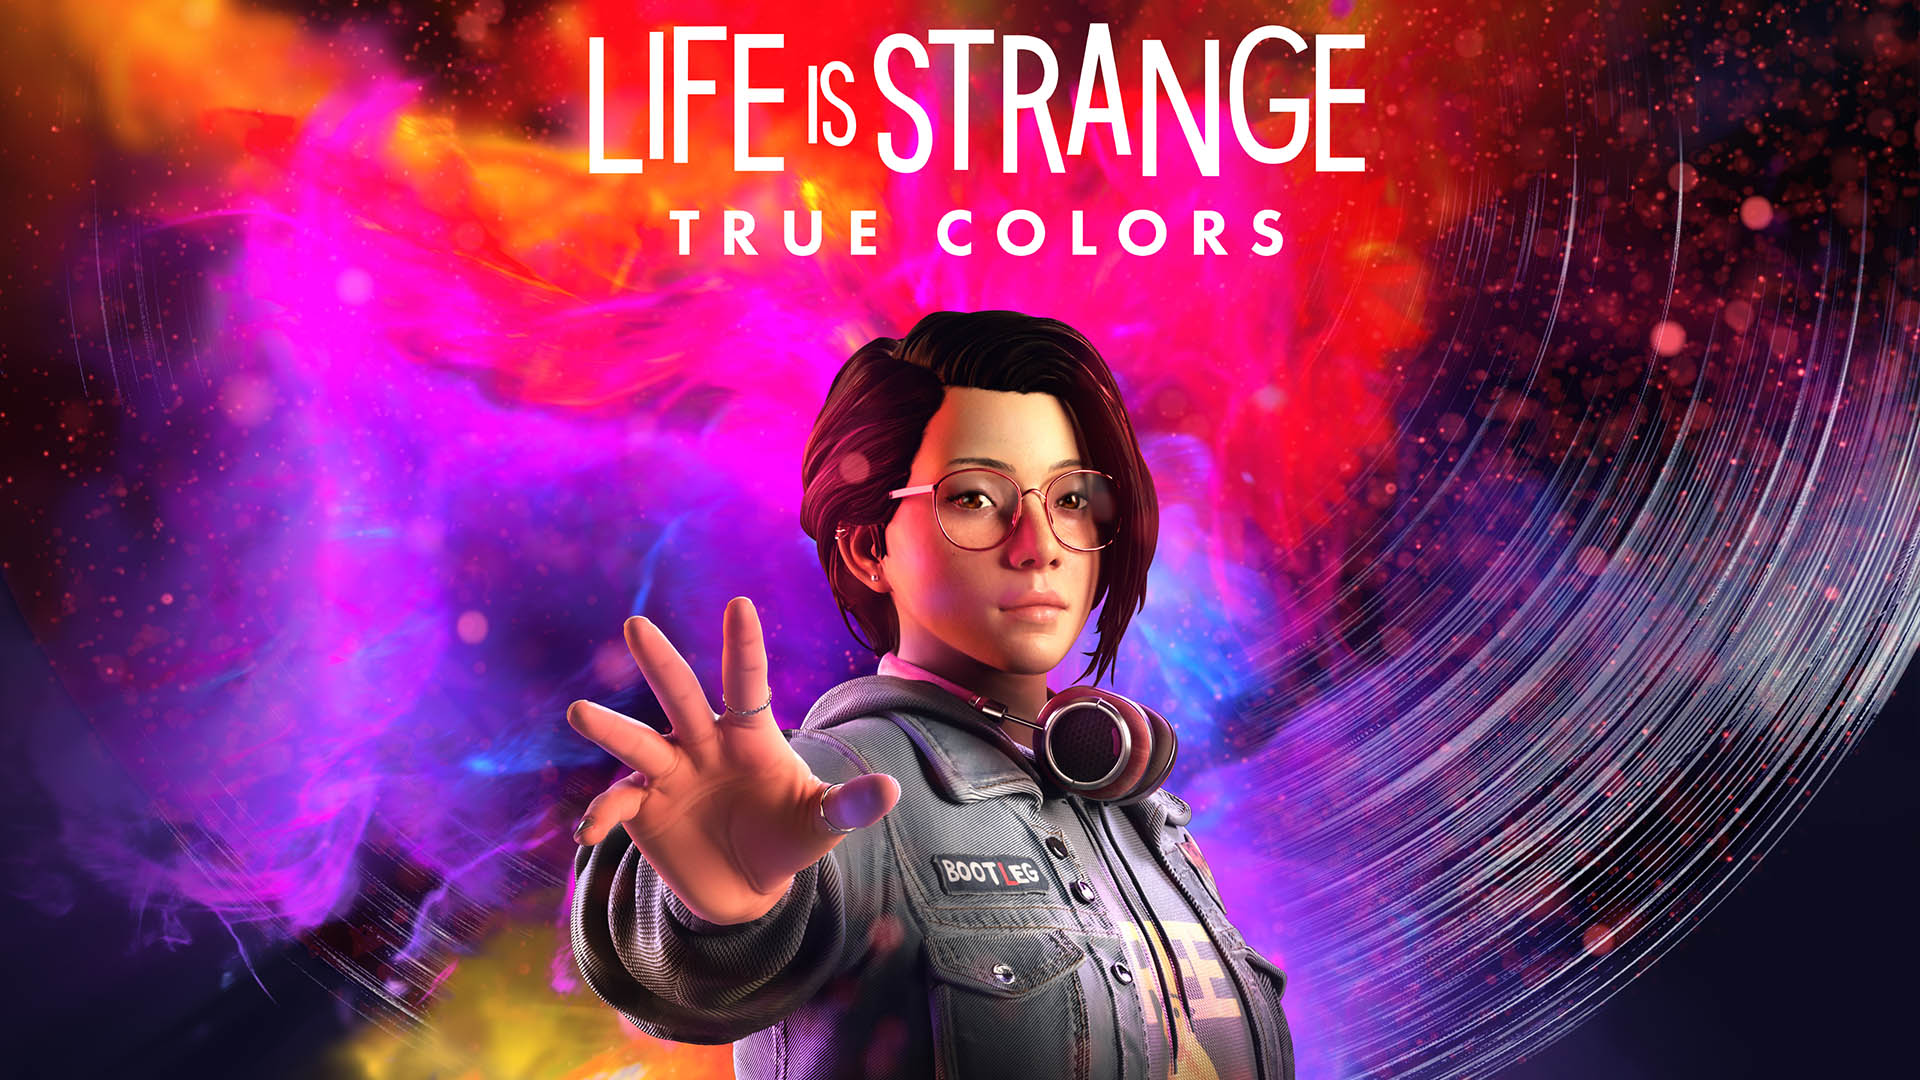 Square Enix only published Life is Strange after a failed pitch for another  game